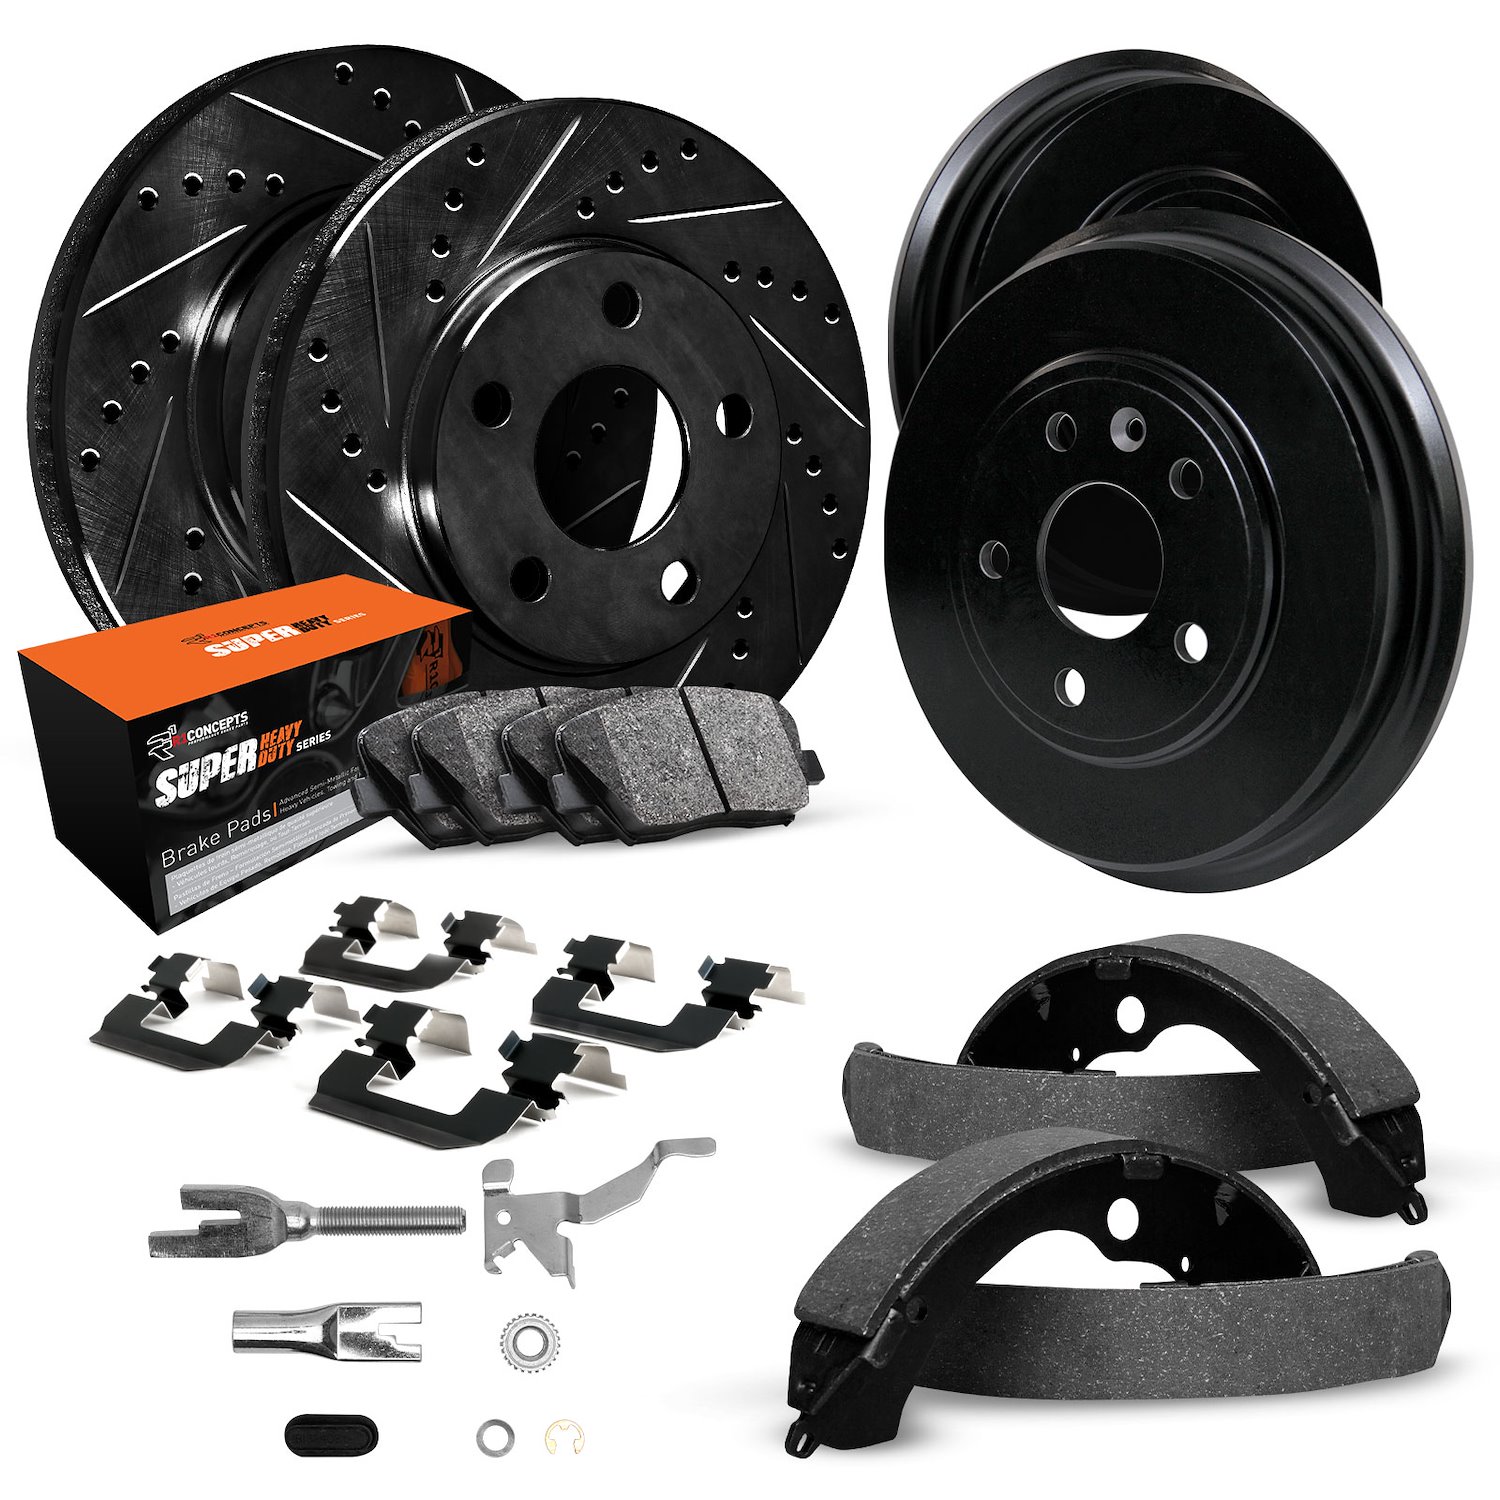 E-Line Drilled/Slotted Black Rotor & Drum Set w/Super-Duty Pads, Shoes, Hardware/Adjusters, 1974-1975 Ford/Lincoln/Mercury/Mazda